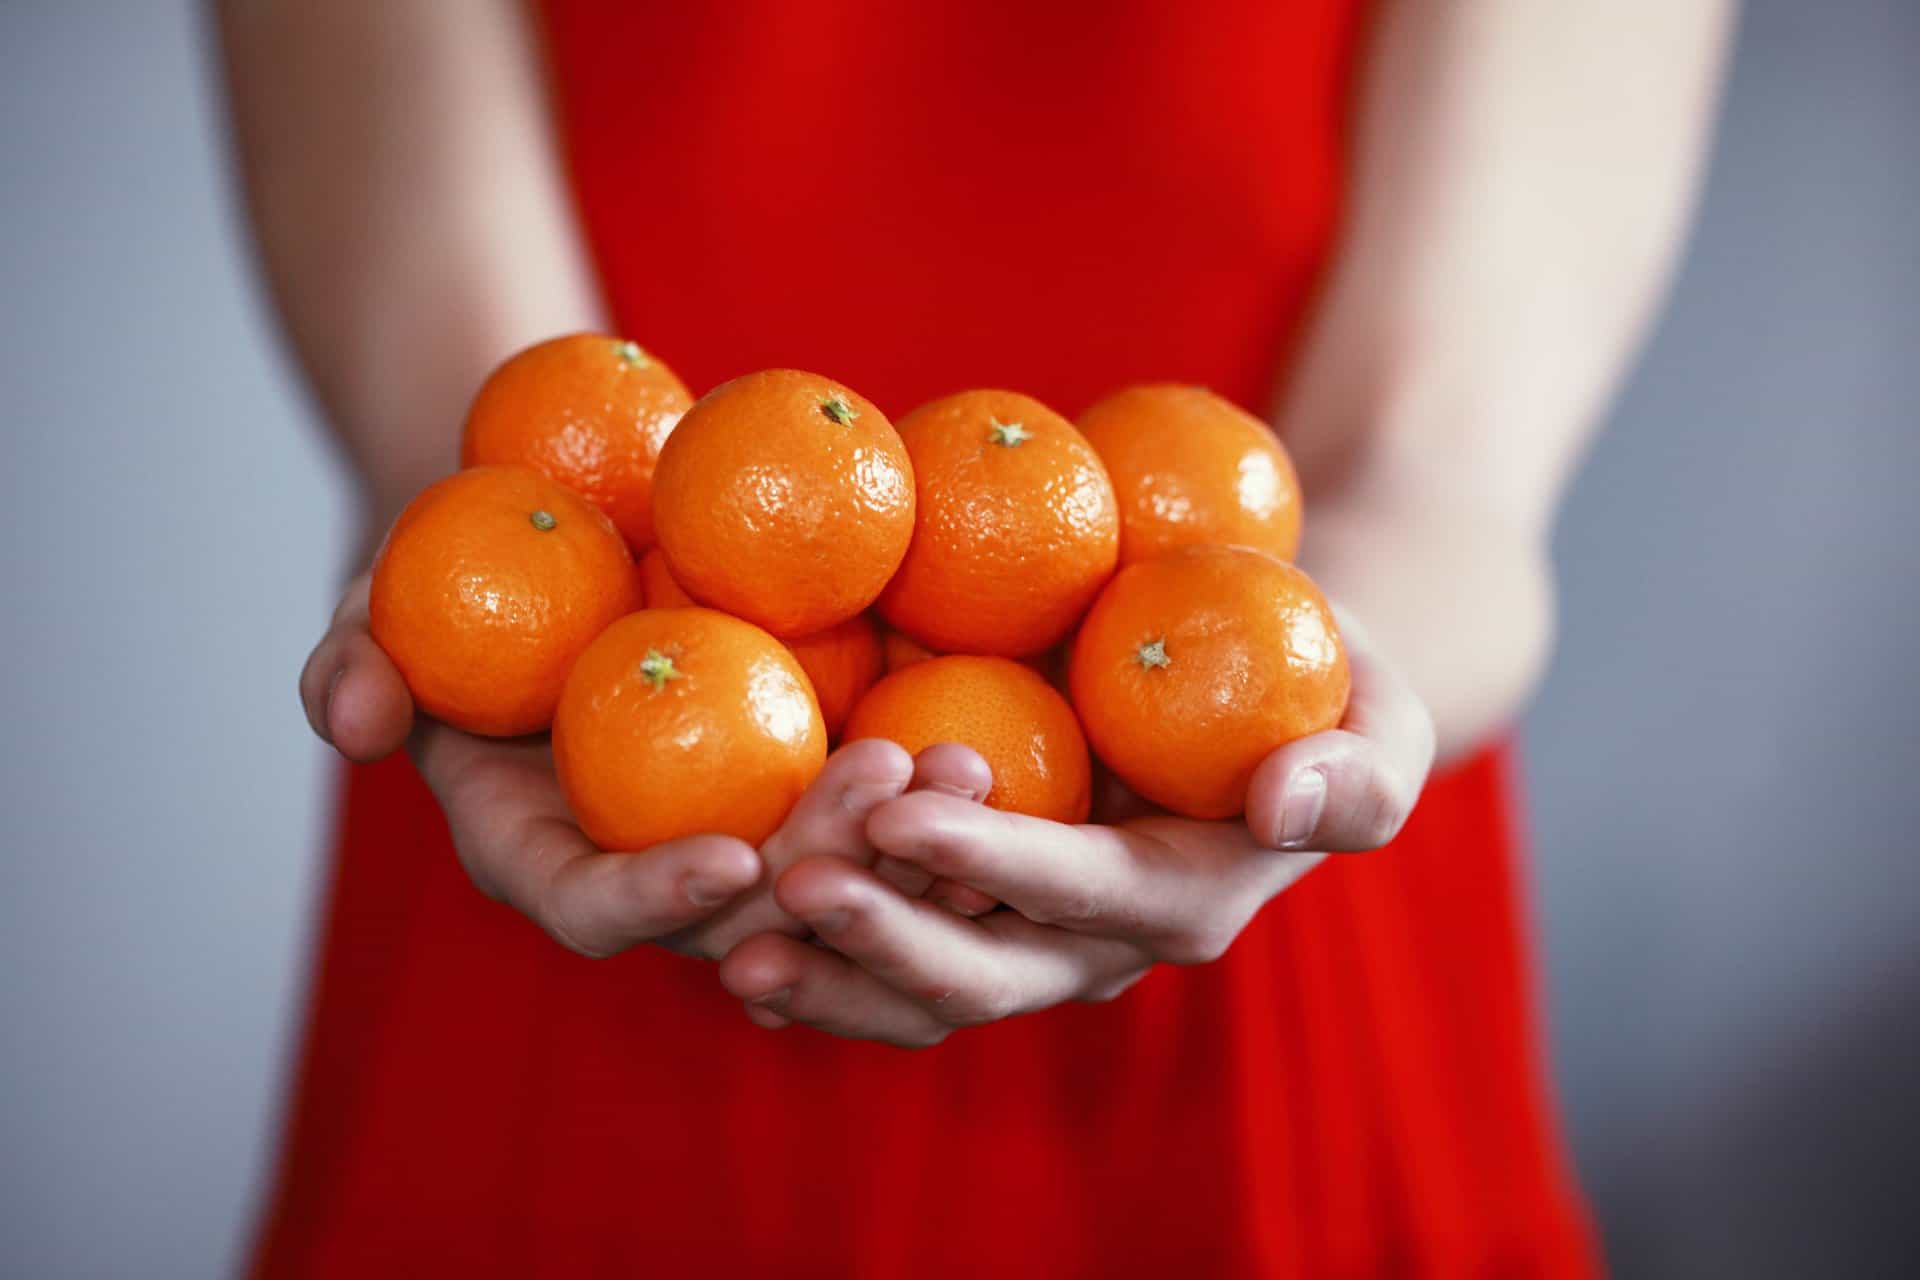 Gift giving etiquette in China includes gifts like oranges, which are pictured here